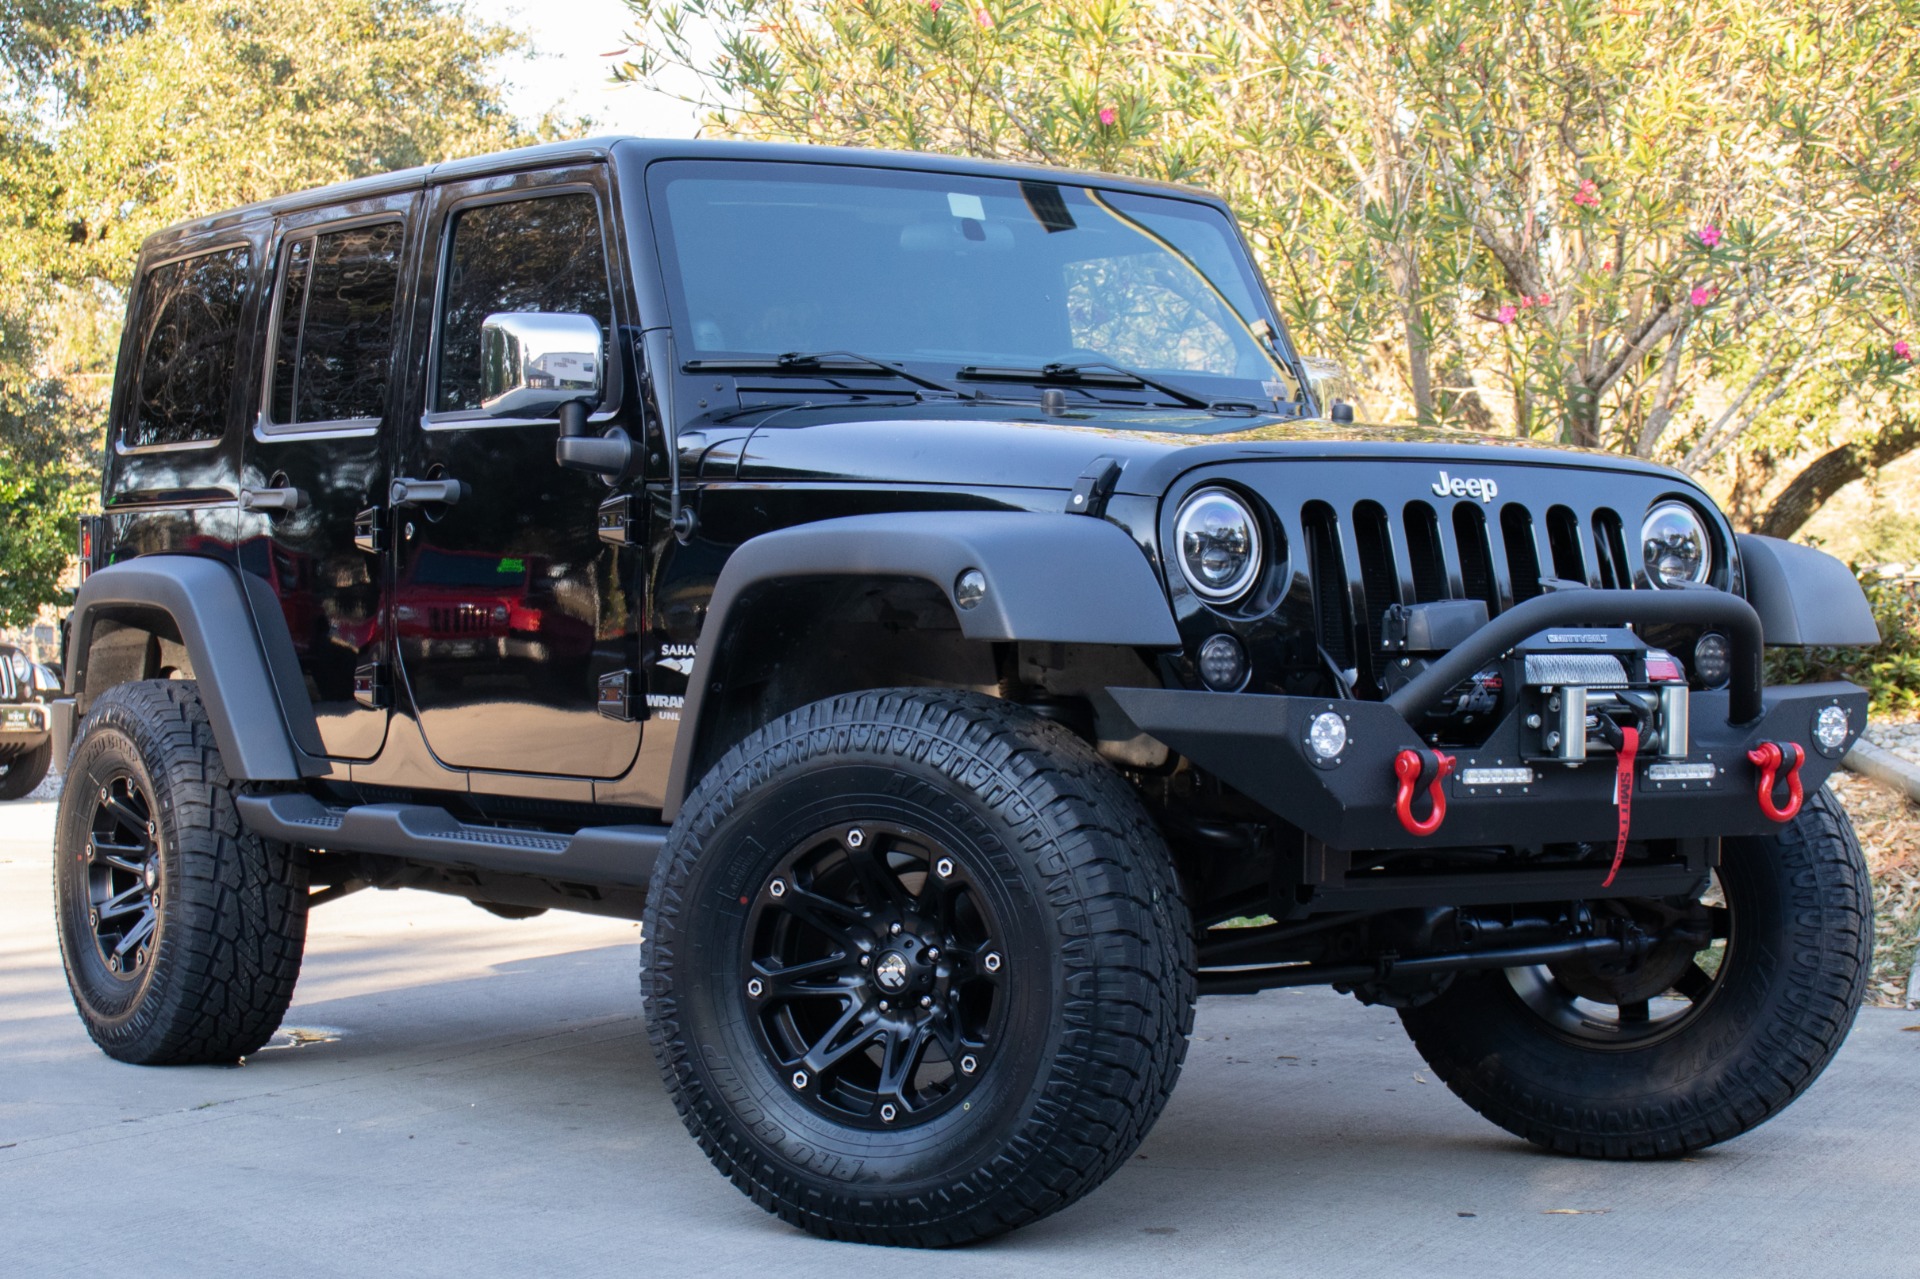 Used 2011 Jeep Wrangler Unlimited Sahara For Sale ($23,995) | Select Jeeps  Inc. Stock #527975